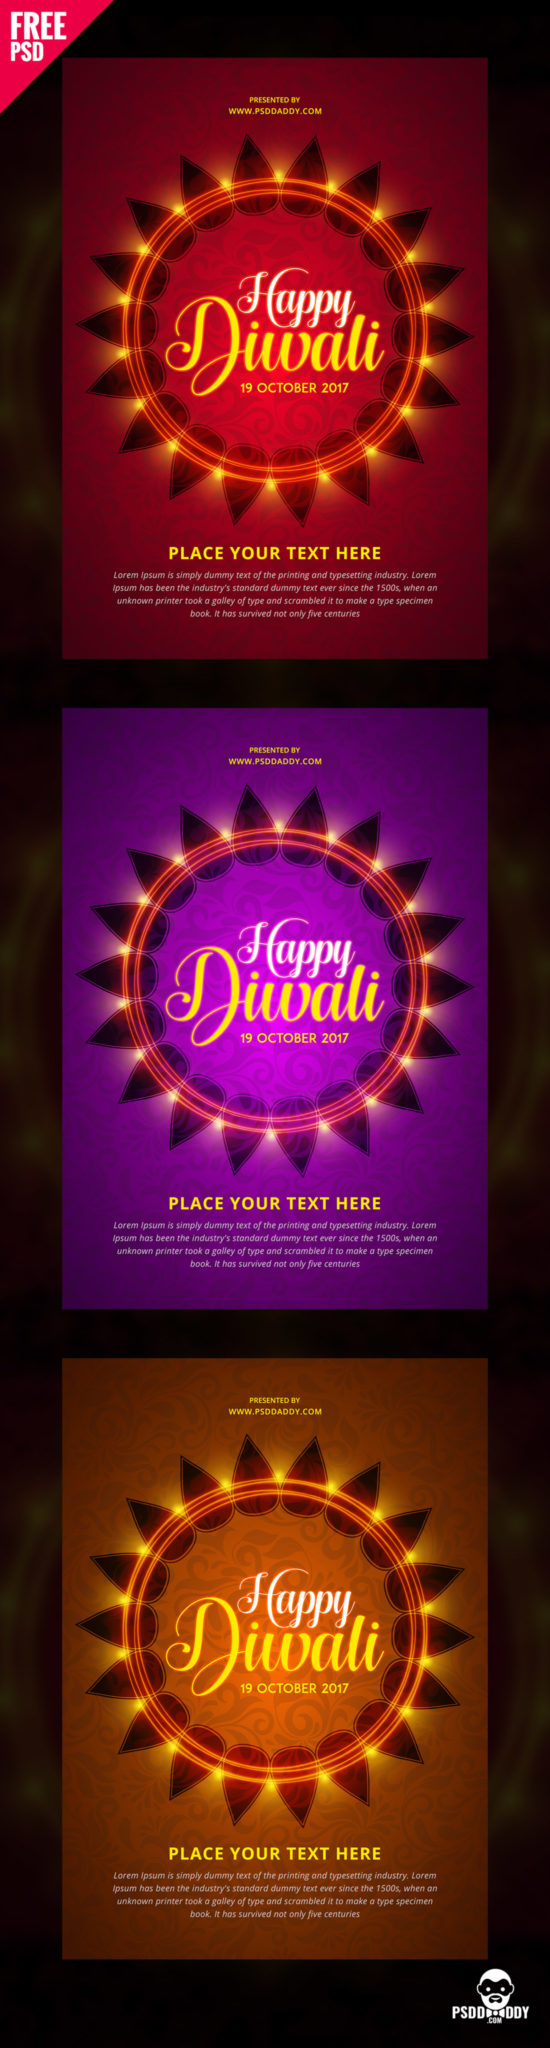 brochure templates psd, business flyer templates free, club flyer templates, deepavali greeting cards, diwali 2016, diwali banner, diwali banner design psd, diwali card, diwali card making, diwali card templates, diwali cards designs, diwali designs, diwali diye, diwali festival, diwali festival 2016, diwali flyer, diwali flyer, diwali flyer design, diwali flyer template, diwali greeting card, diwali greeting card designs, diwali greeting cards images, diwali greetings, diwali greetings with my photo, diwali images, diwali invitation, diwali invitation card, diwali invitation templates, diwali party invitation, diwali party invitation templates, diwali photo, diwali photo cards, diwali poster, diwali posters image, diwali vector, diwali vector free download, diwali wallpaper, diwali wishes images, dl flyer, event flyer templates, flyer creator, flyer design templates, flyer download, flyer for free, flyer free download, flyer generator, flyer party, flyer photoshop, flyer psd free, flyer template psd, flyer templates, flyer templates free download, flyers, free club flyer templates, free diwali cards, free event flyer templates, free flyer, free flyer design, free flyer design templates, free flyer templates, free party flyer templates, free poster templates, free psd, free psd flyer, free psd flyer templates, free psd poster templates, free psd templates, happy diwali, happy diwali cards, happy diwali poster, happy diwali vector free download, happy diwali wallpaper, happy diwali wishes, herbalife flyers, party flyer, party flyer psd, party flyer template free, party flyer templates, personalized diwali cards, photoshop flyer, photoshop flyer templates, poster psd, poster template free download, printable flyers, psd flyer, psd flyer free, psd templates, template photoshop, template psd, templates flyer, psd daddy, psddaddy, creative psd, free psd, download psd, psd, best design psd, psd freebies, psdfreebies, psd free, mockup psd, free pik, iphone x in hand mockup psd,